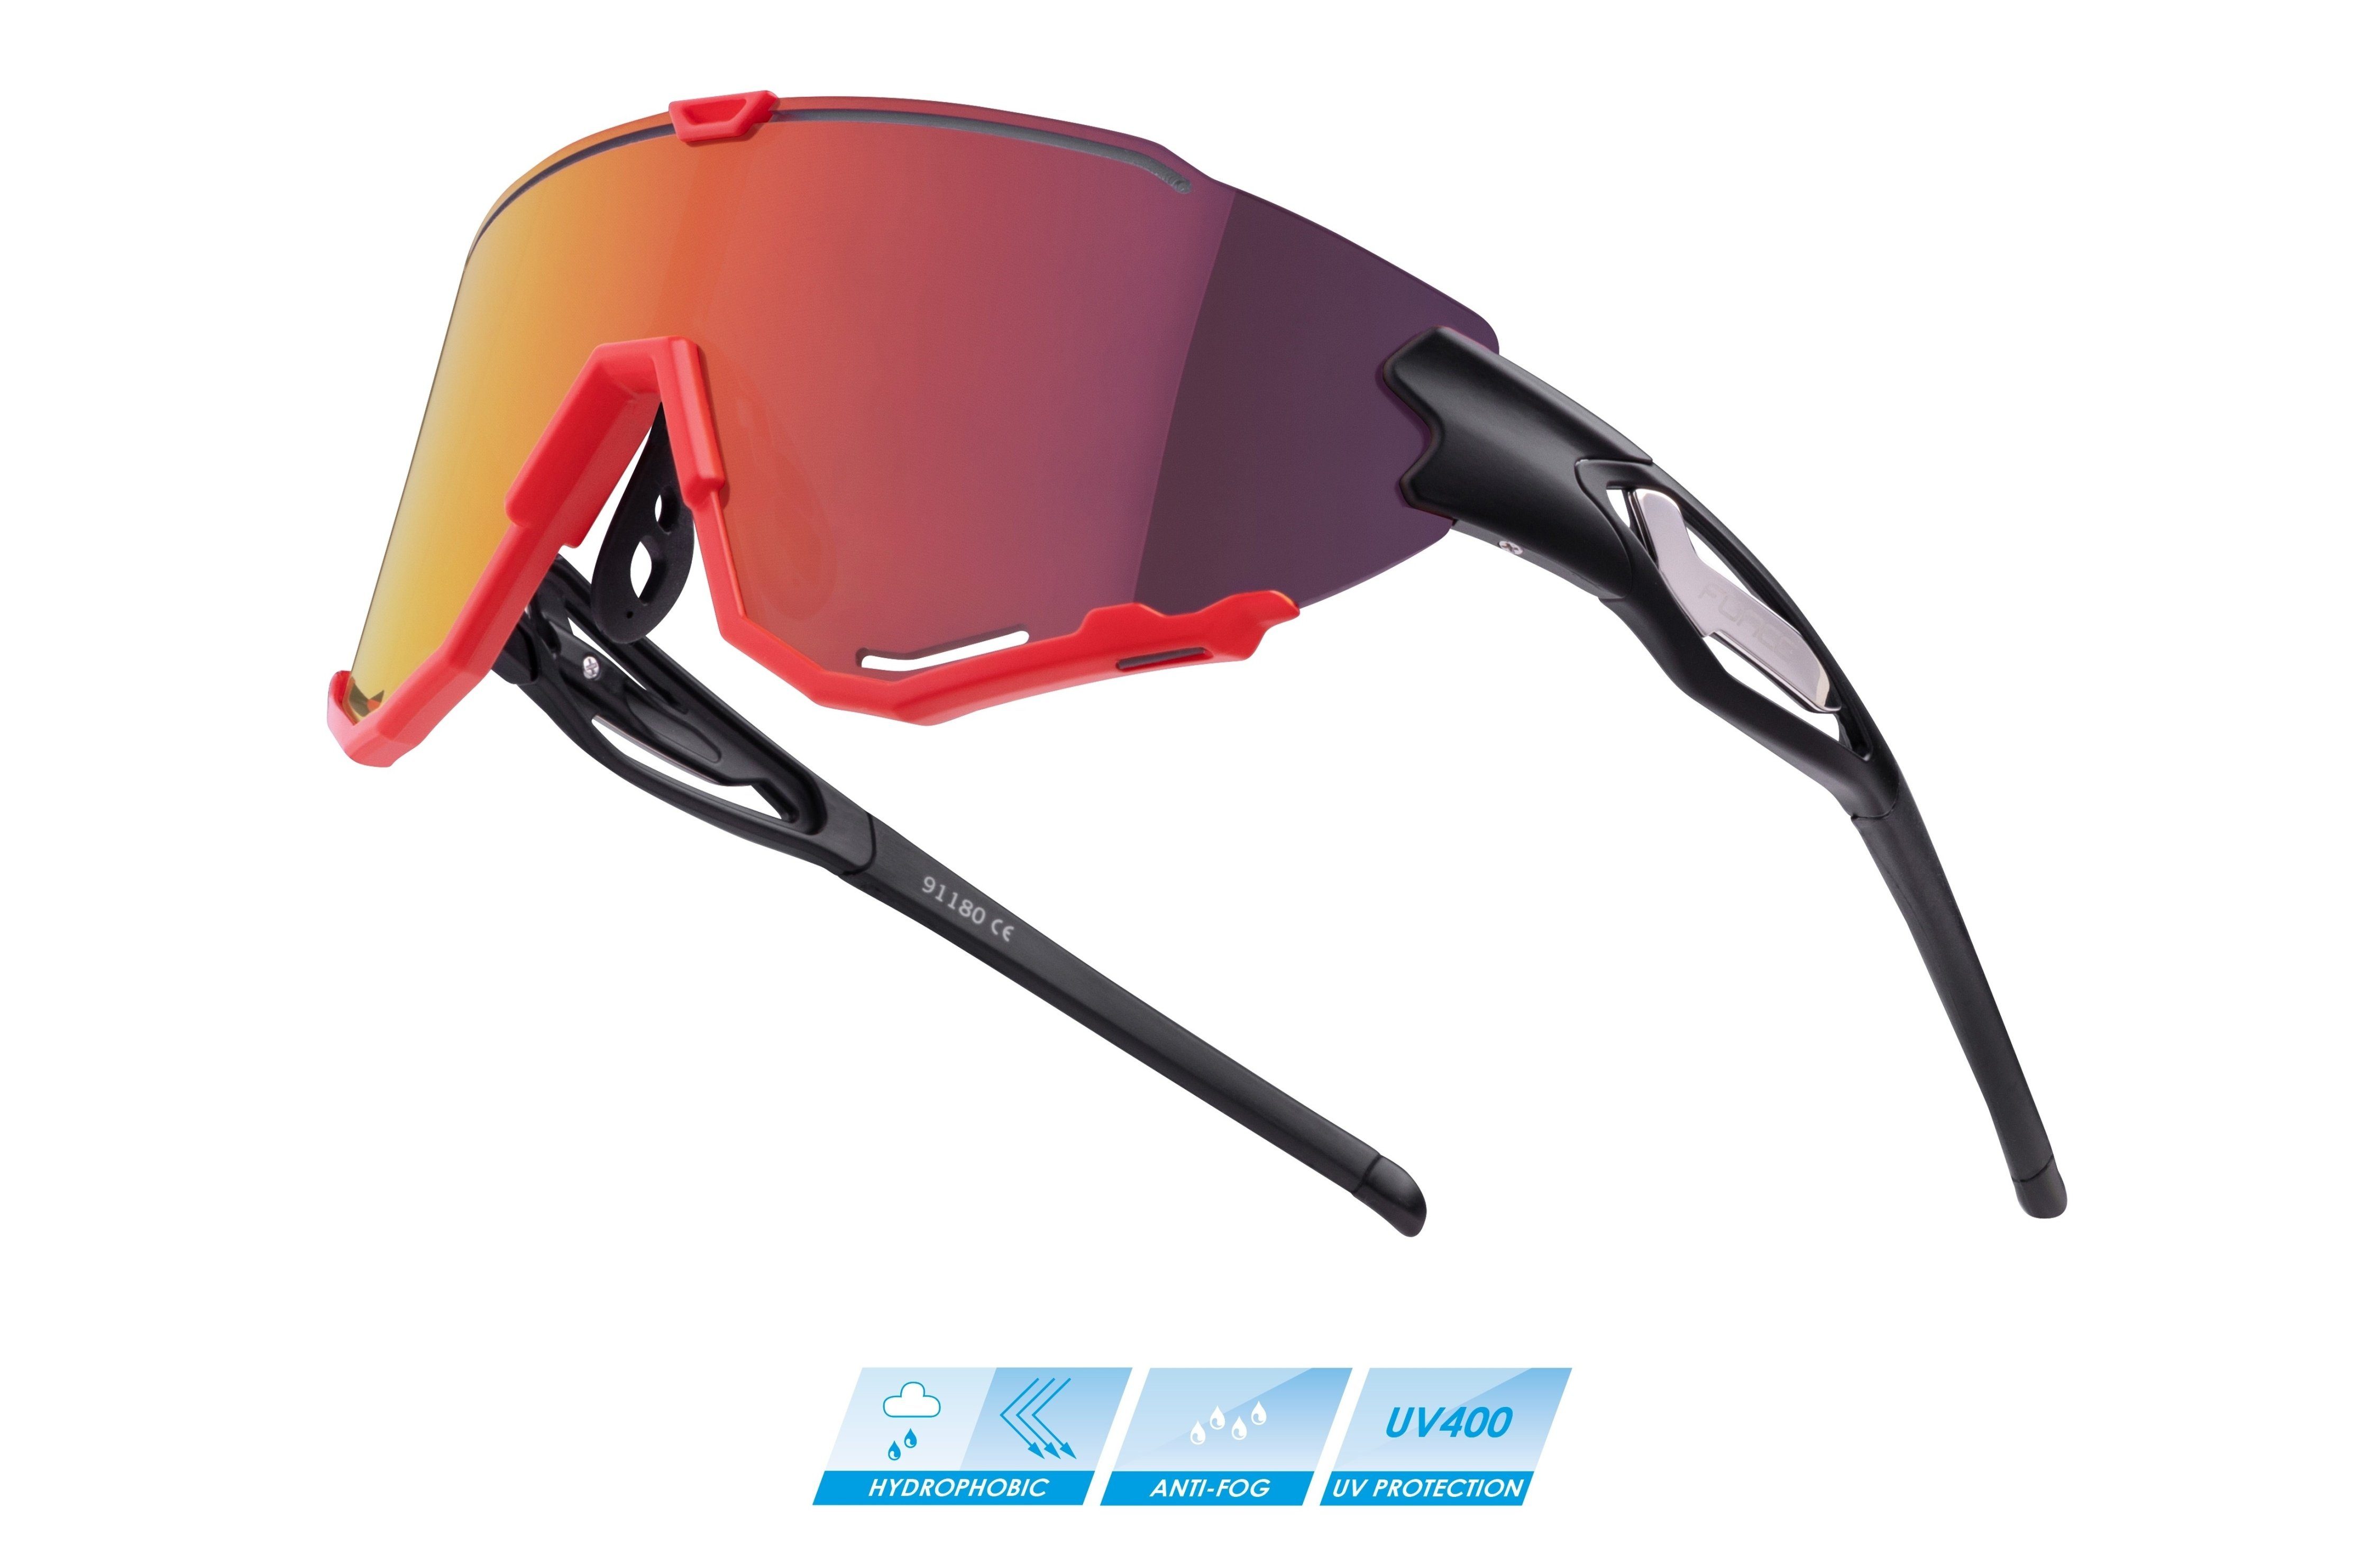 FORCE Fahrradbrille Sonnenbrille FORCE CREED Wechsel-Linsscheibe rote